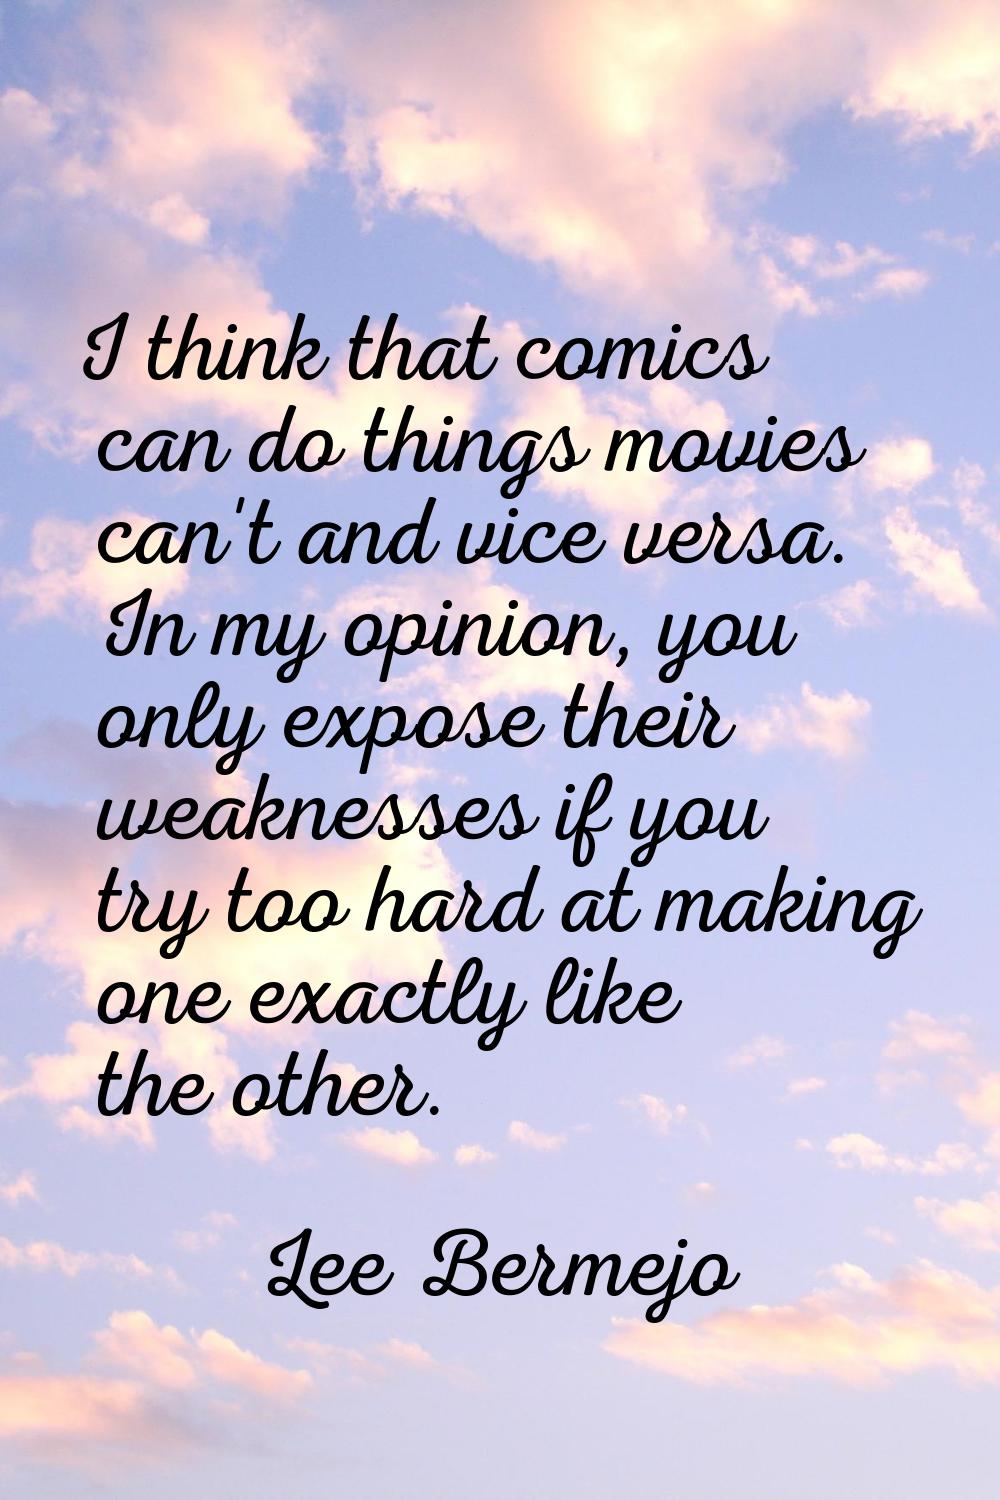 I think that comics can do things movies can't and vice versa. In my opinion, you only expose their